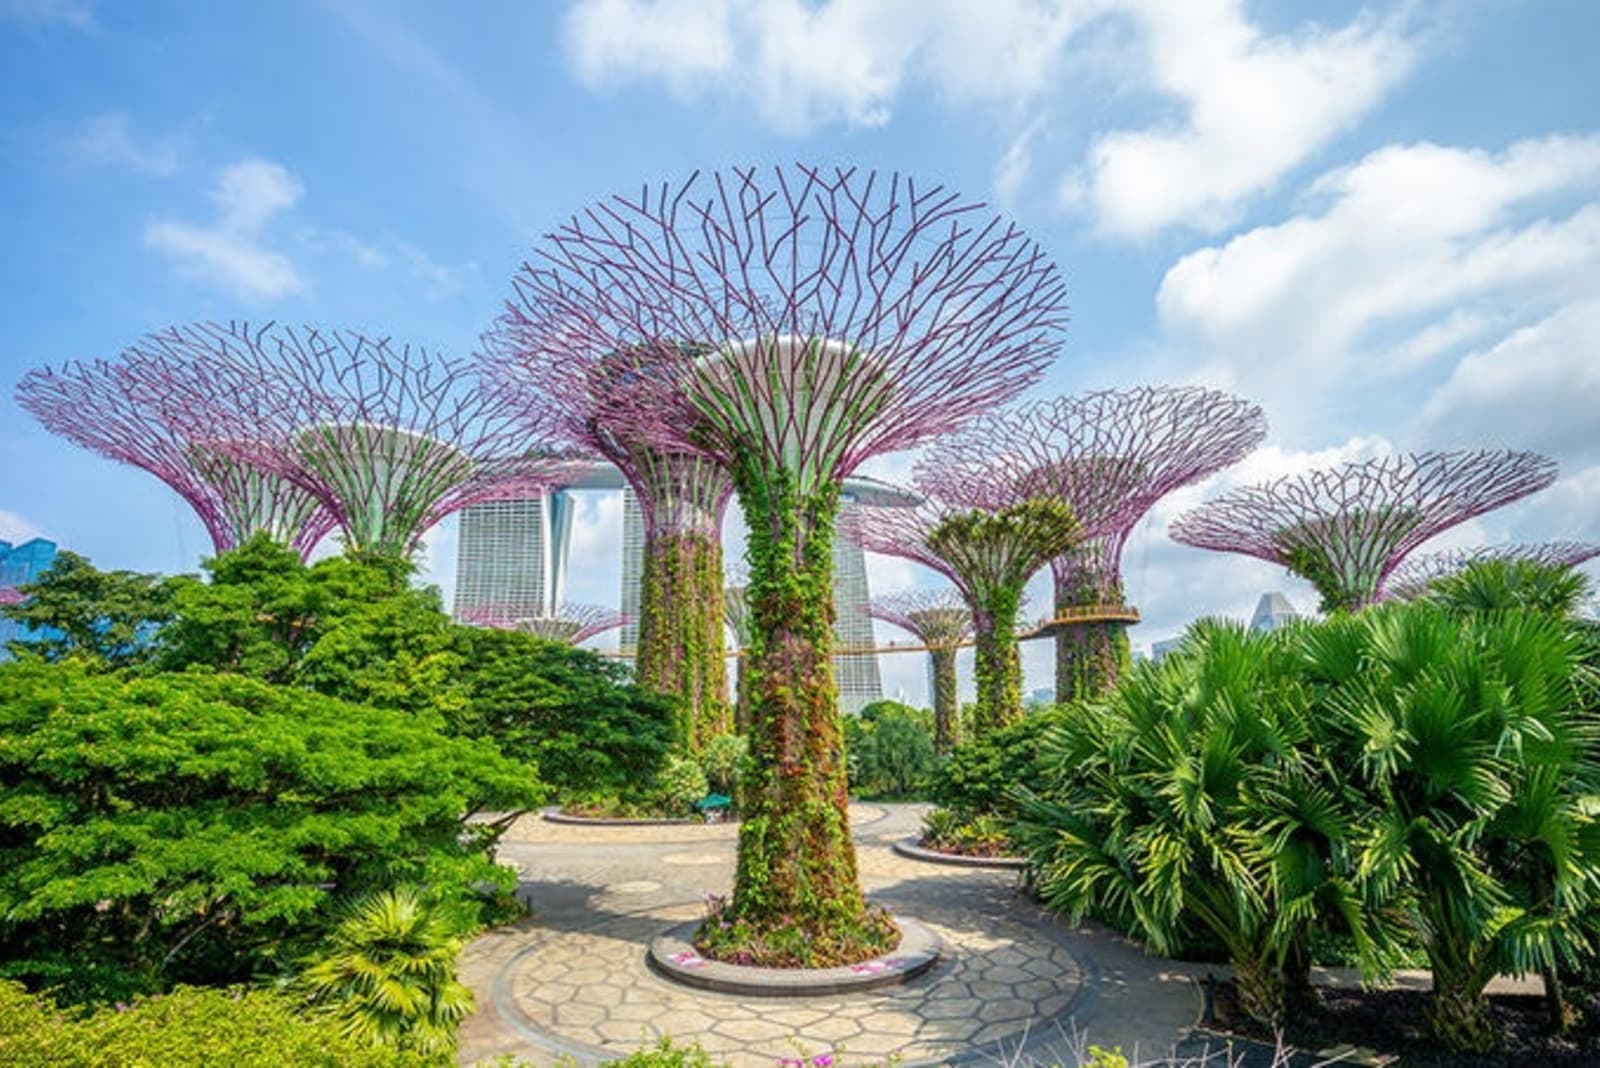 rs-6-gardens-by-the-bay-supertrees-singapore-shutterstock_1153910839.jpg